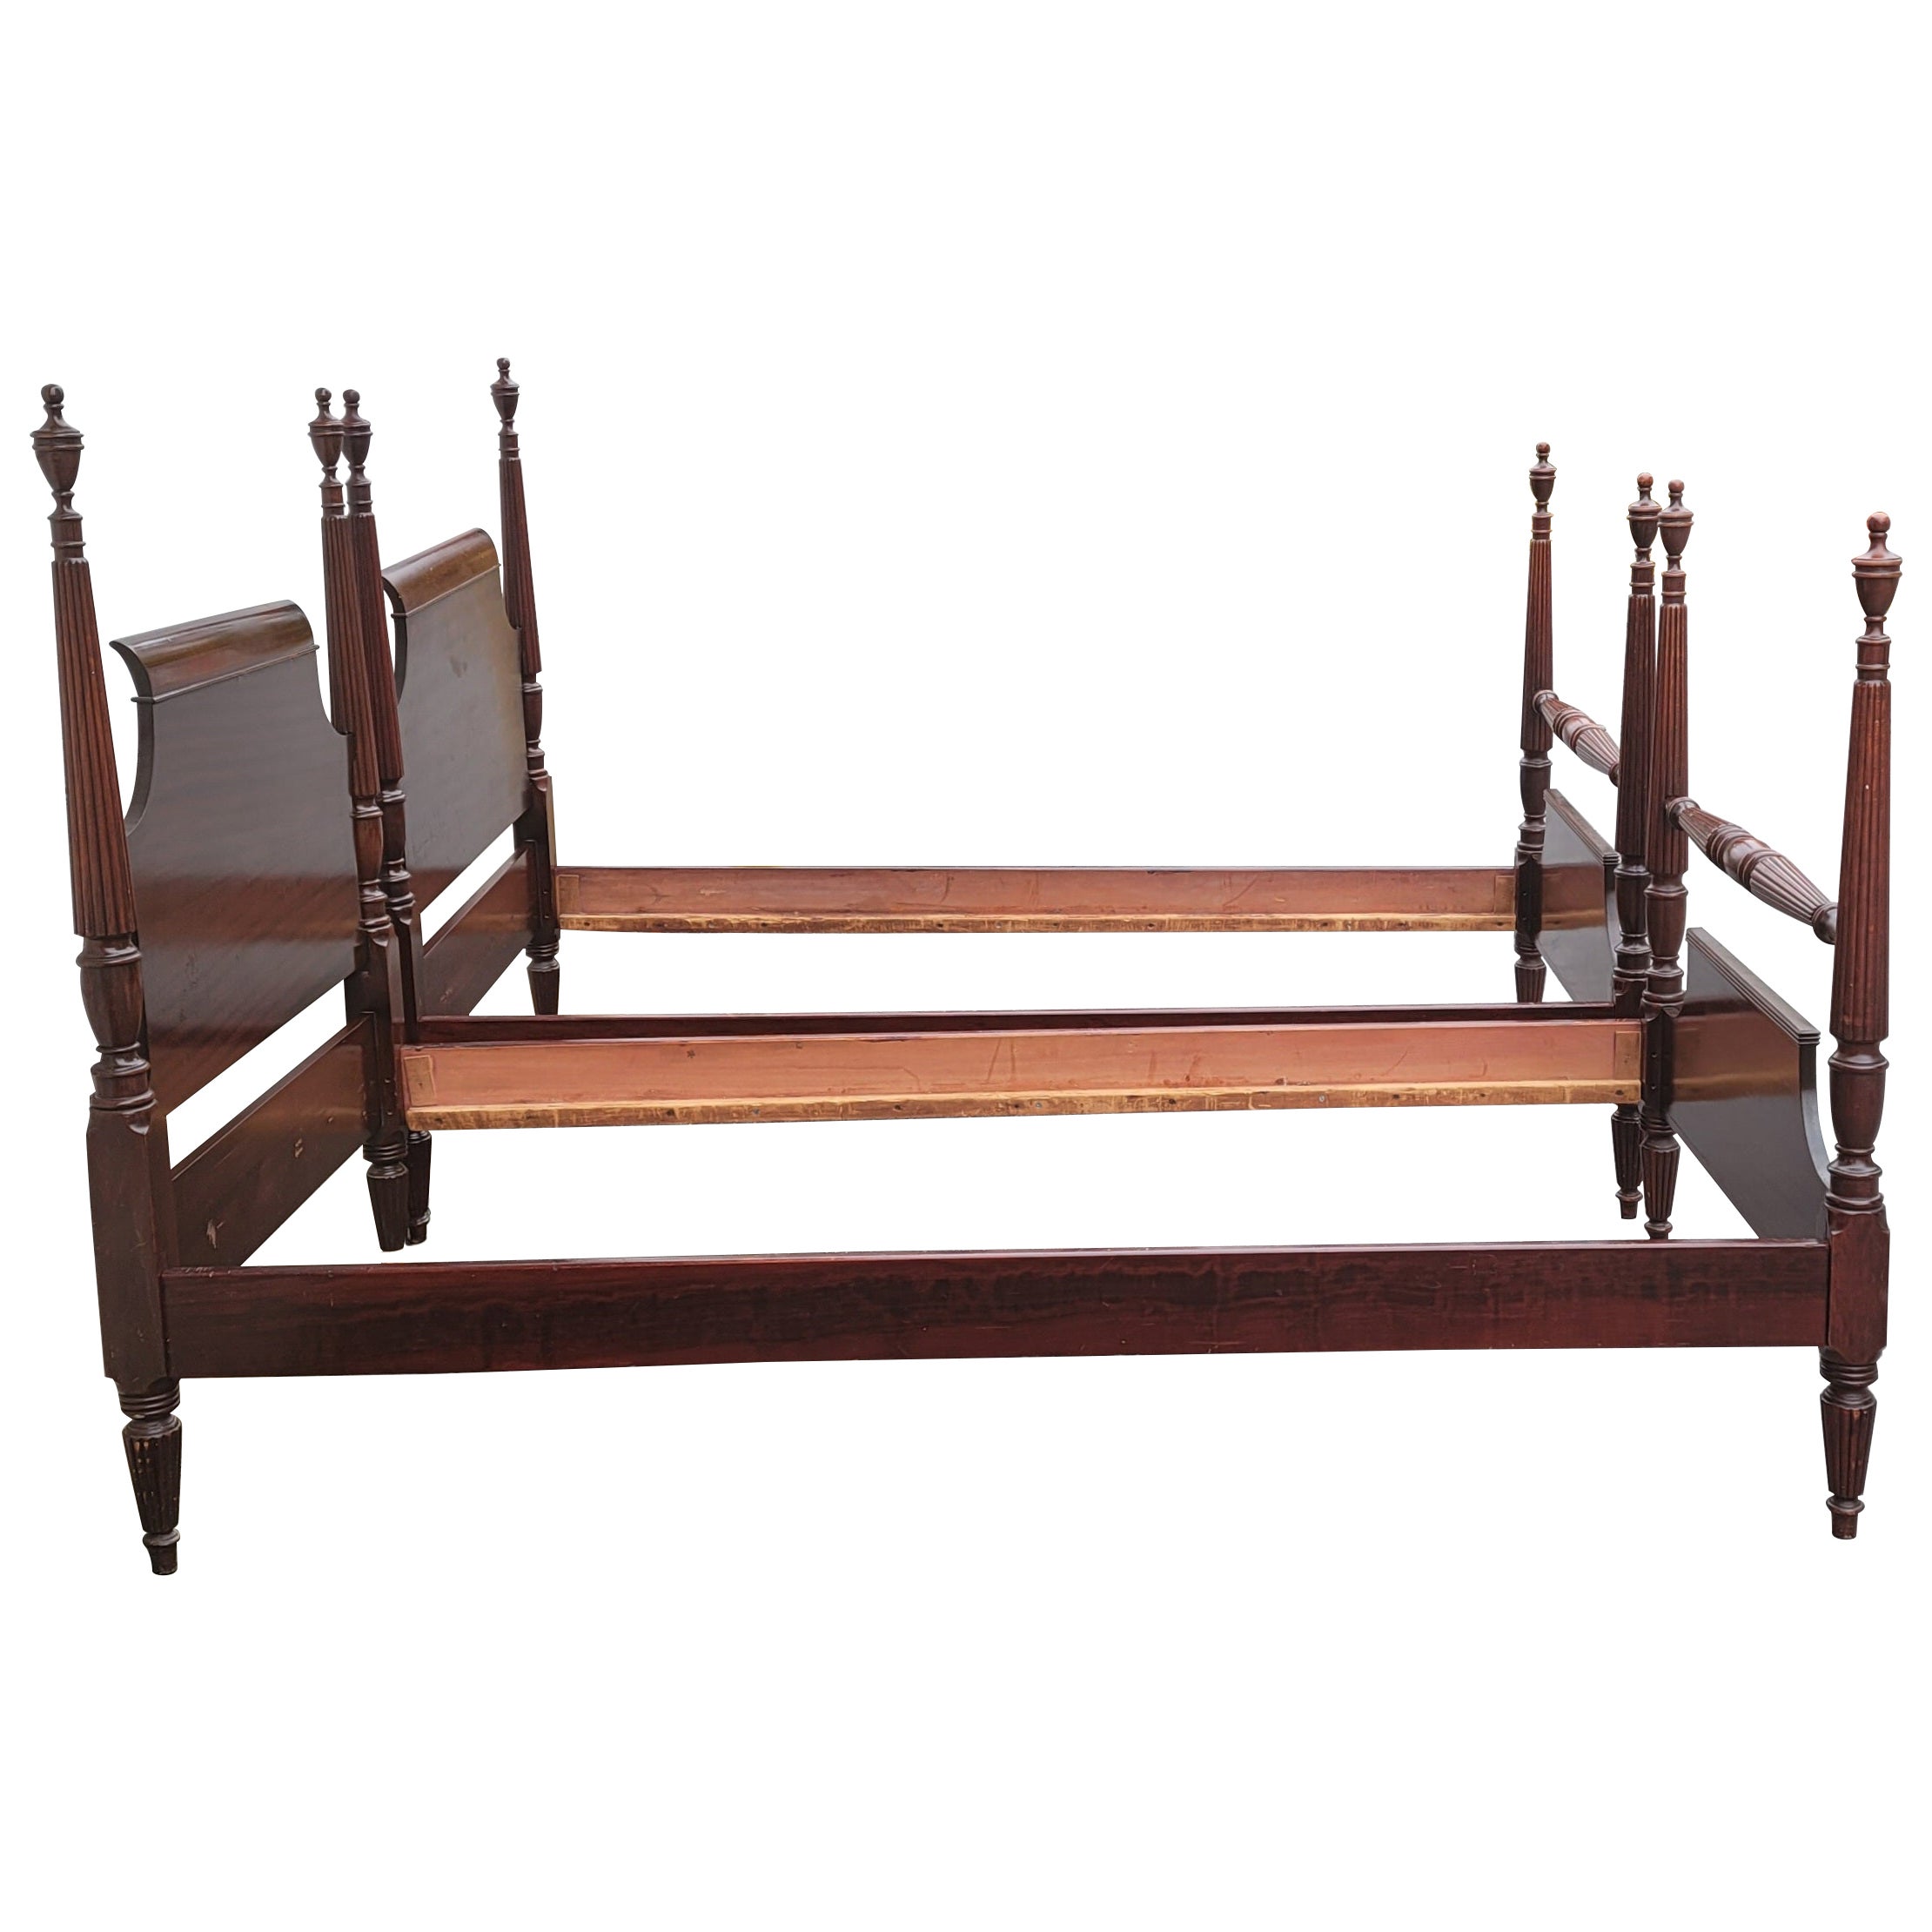 A patinated Pair of Federal Style Mahogany Semi-Poster Twin Size Bedsteads.
Measure 81.5